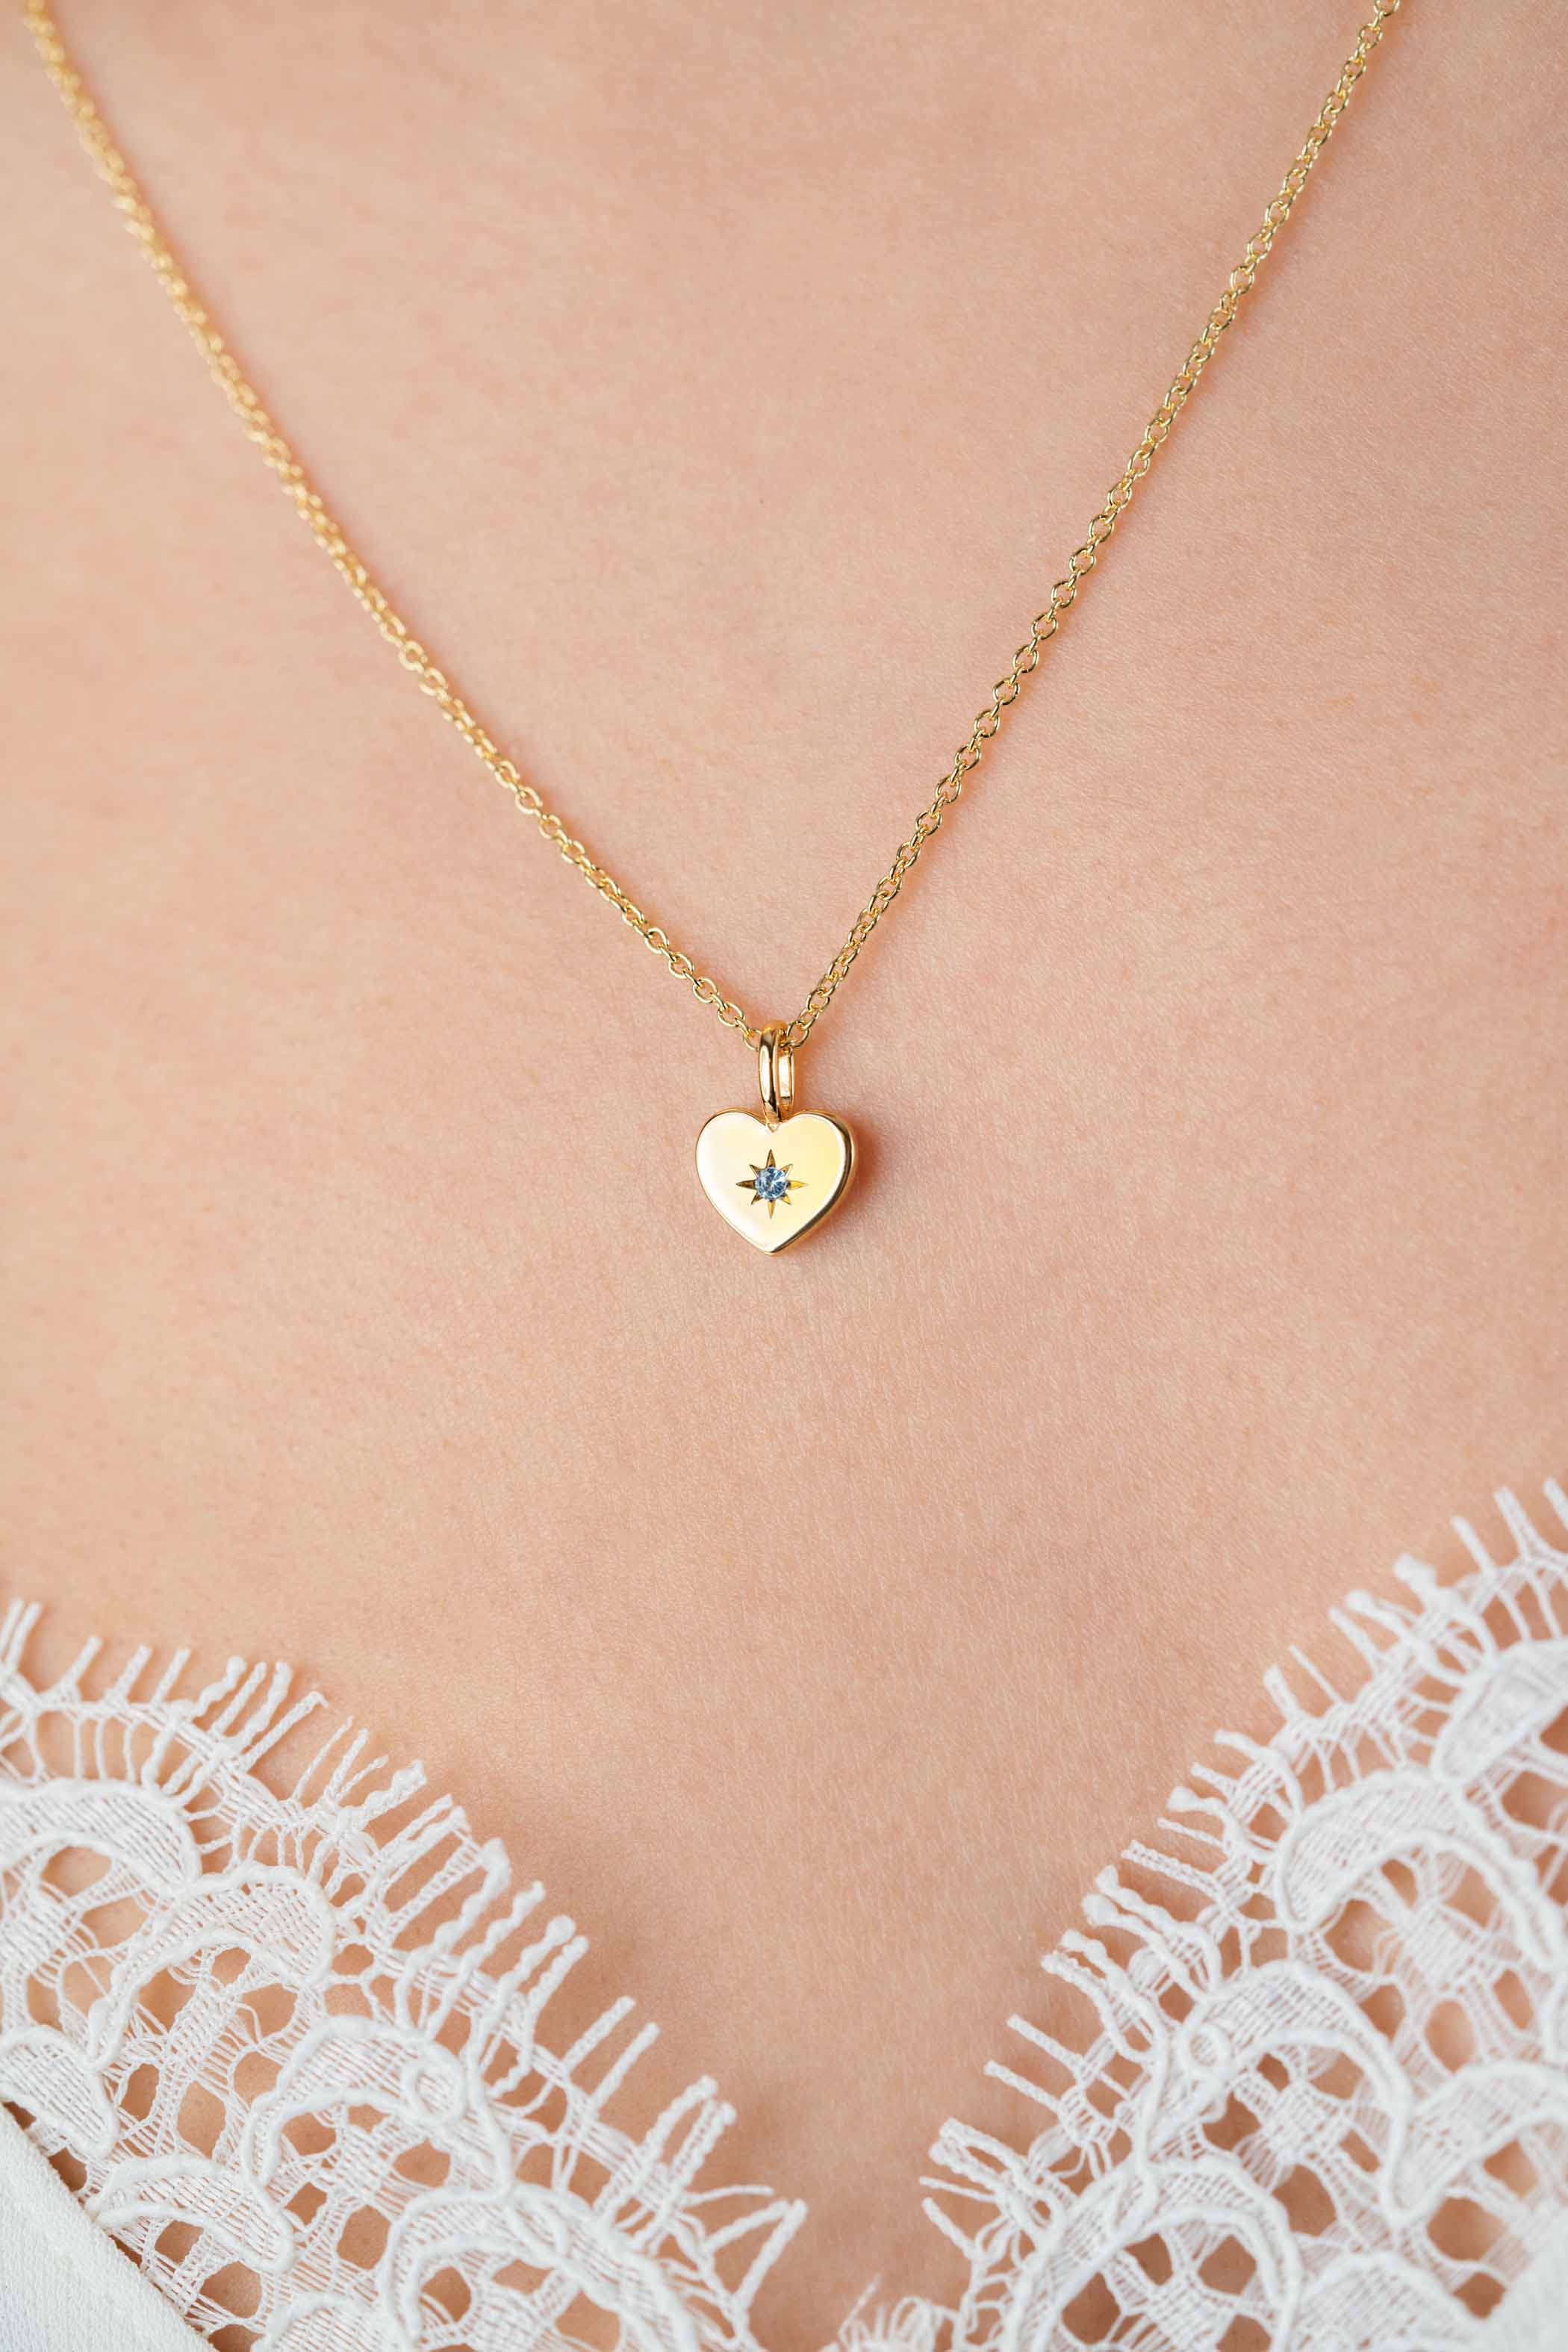 MARCH Pendant 12mm Gold Plated Heart Birthstone Blue Aquamarine Zirconia (excl. necklace)